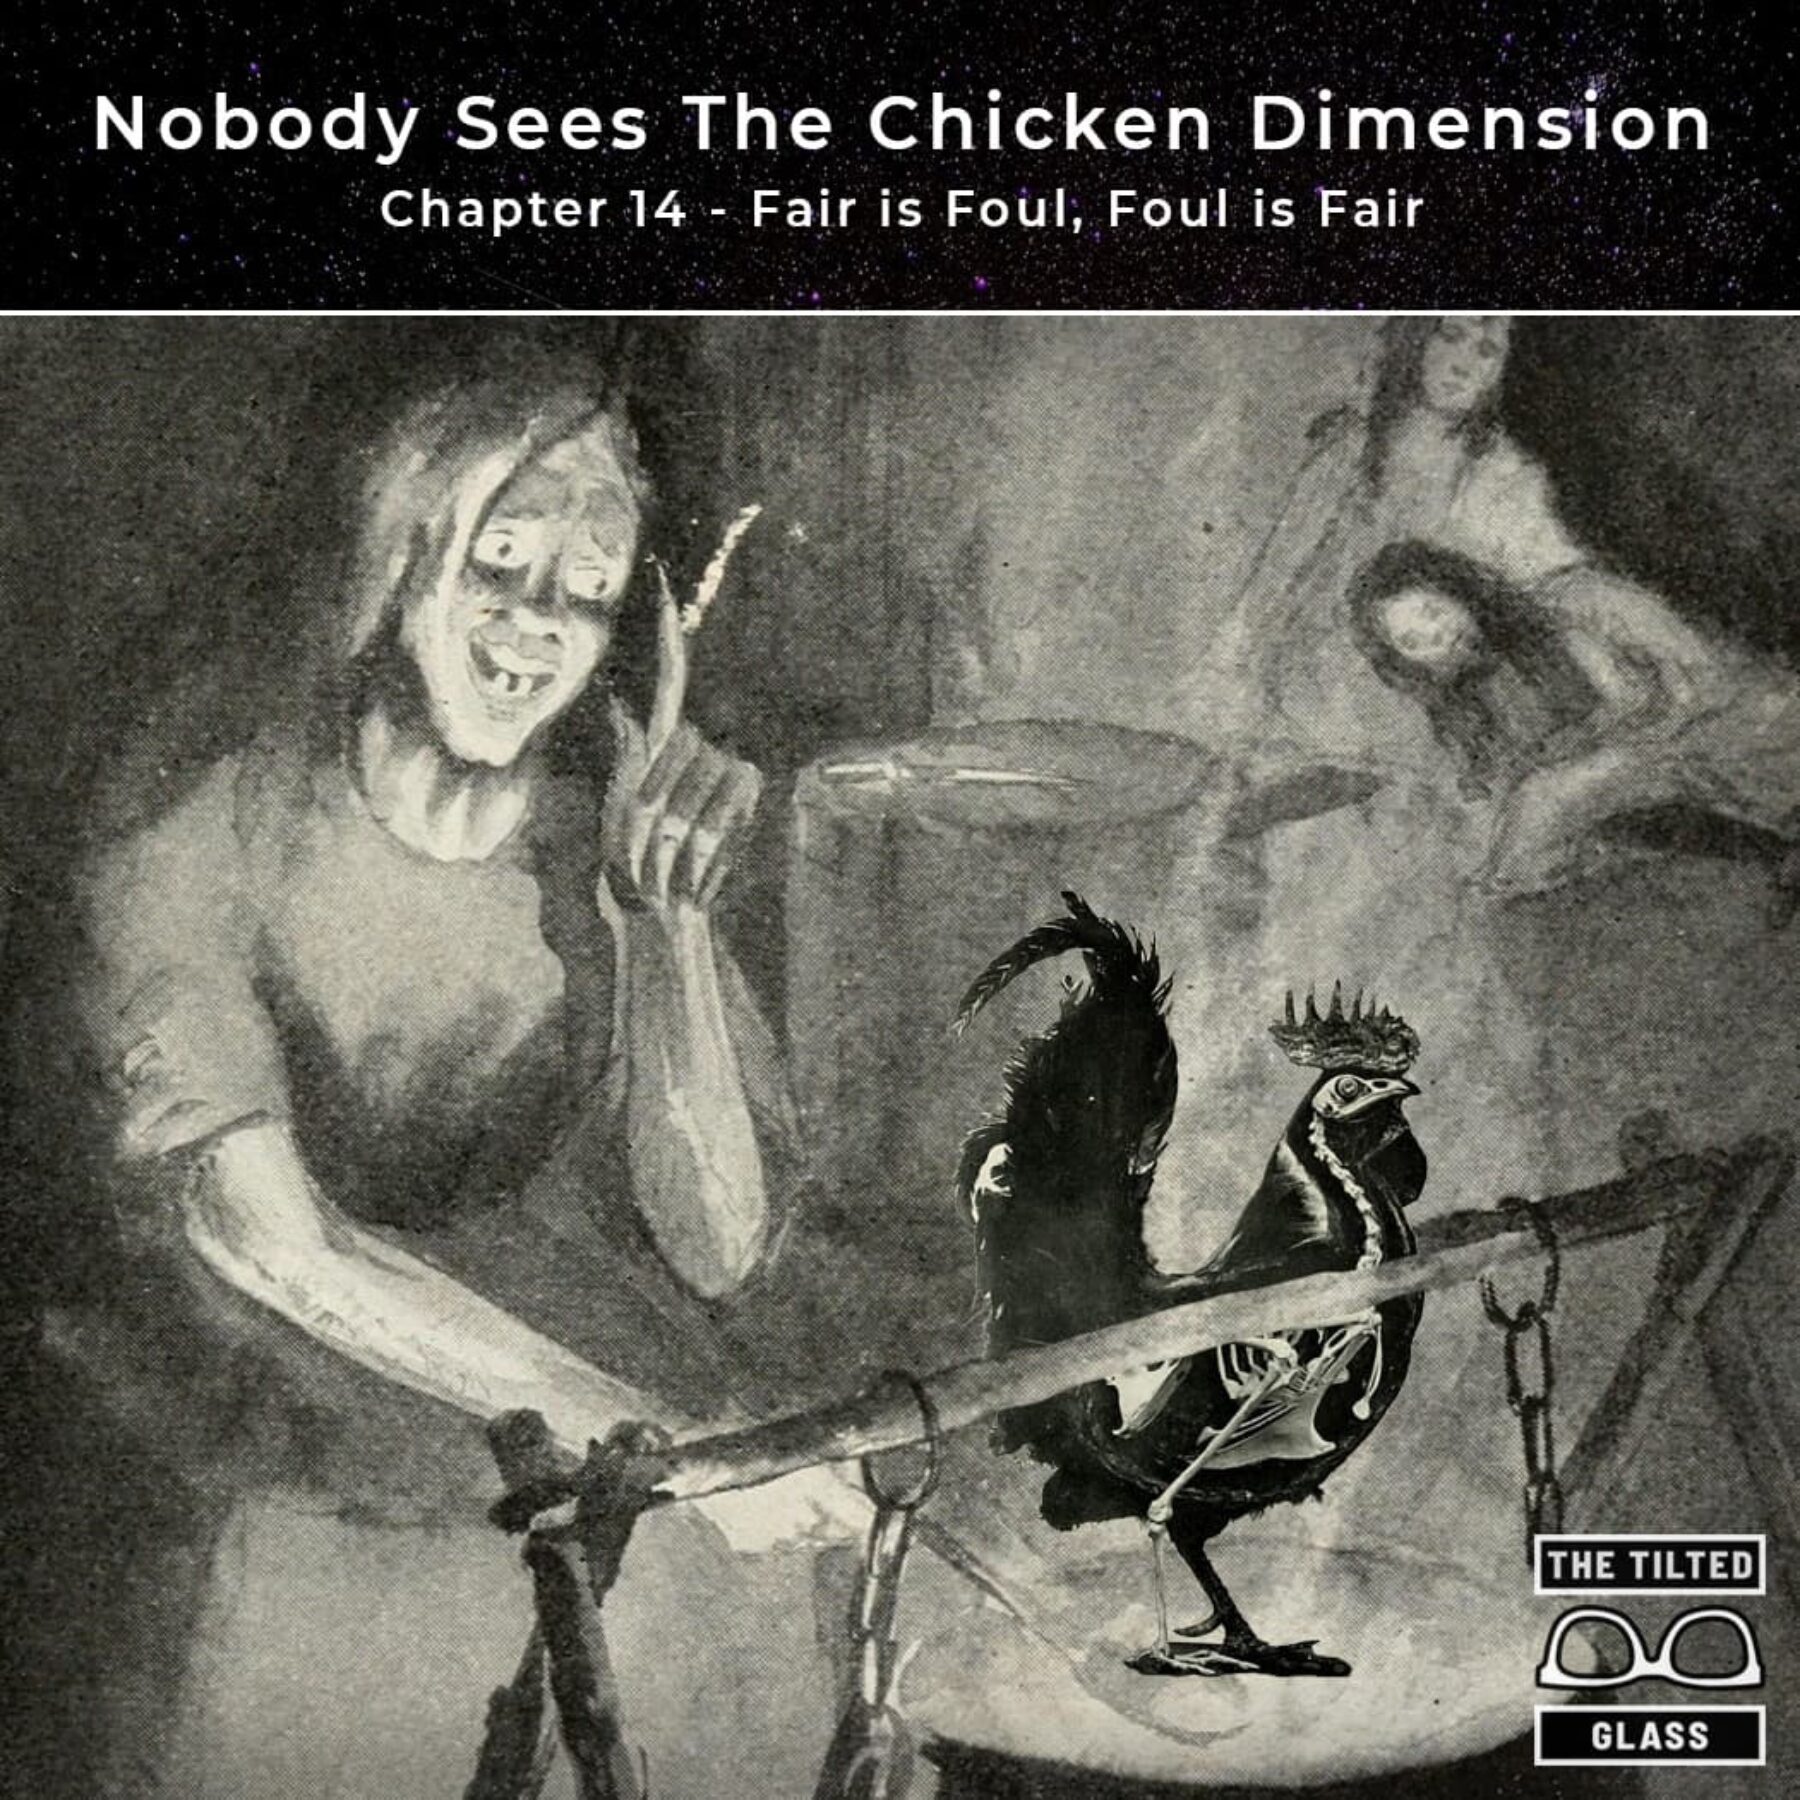 Nobody Sees The Chicken Dimension - Chapter 14 - Fair is Foul, Foul is Fair